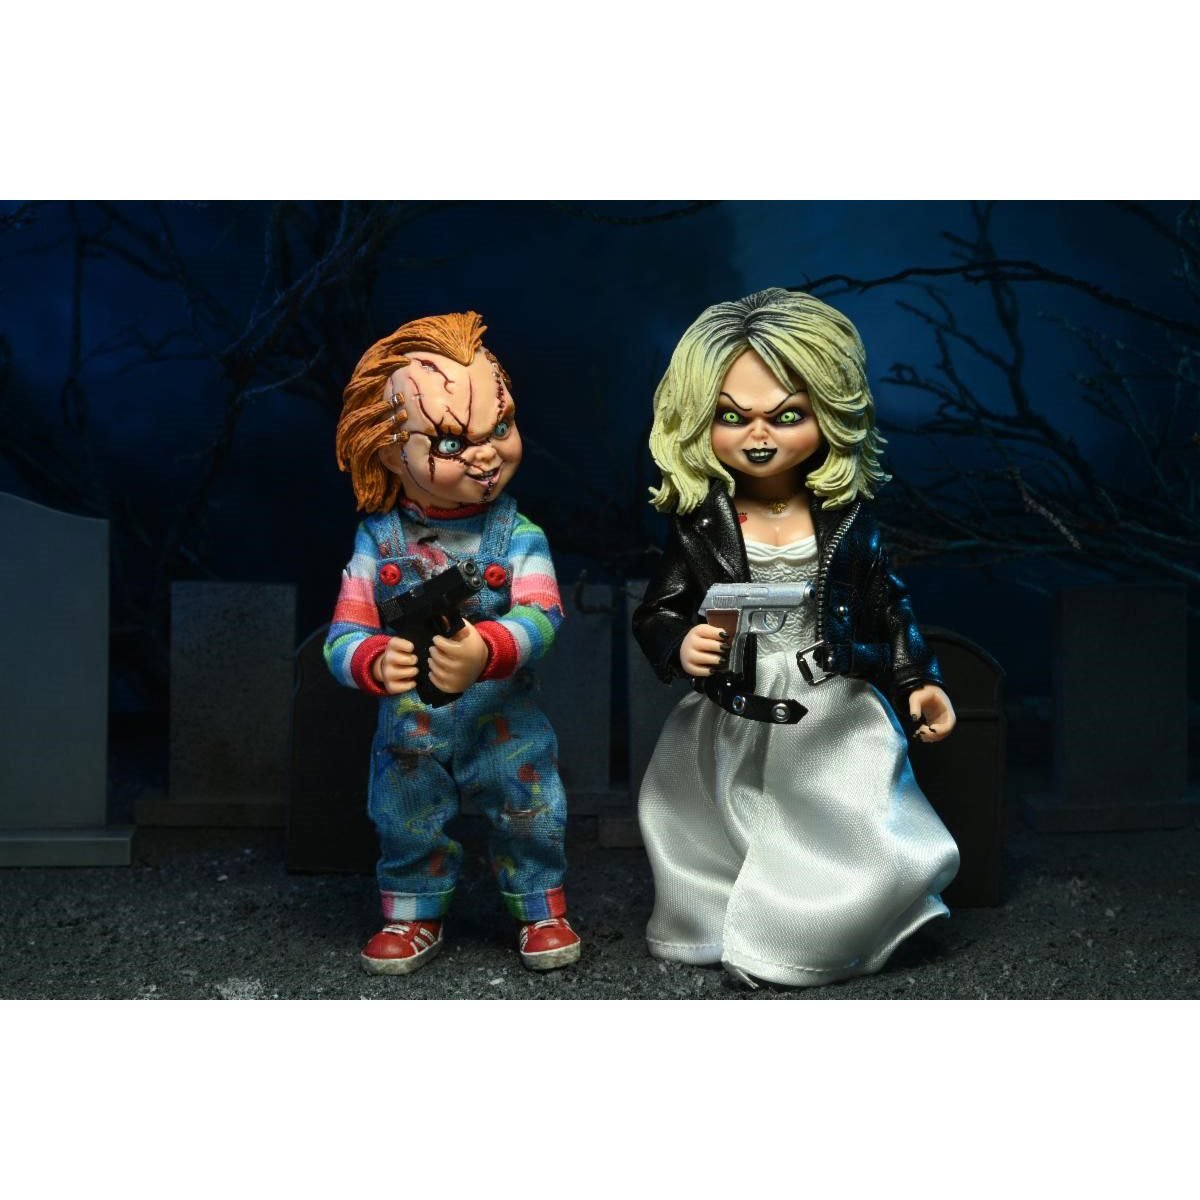 Bride of Chucky Chucky and Tiffany 8-Inch Scale Clothed Action Figure 2-Pack - State of Comics